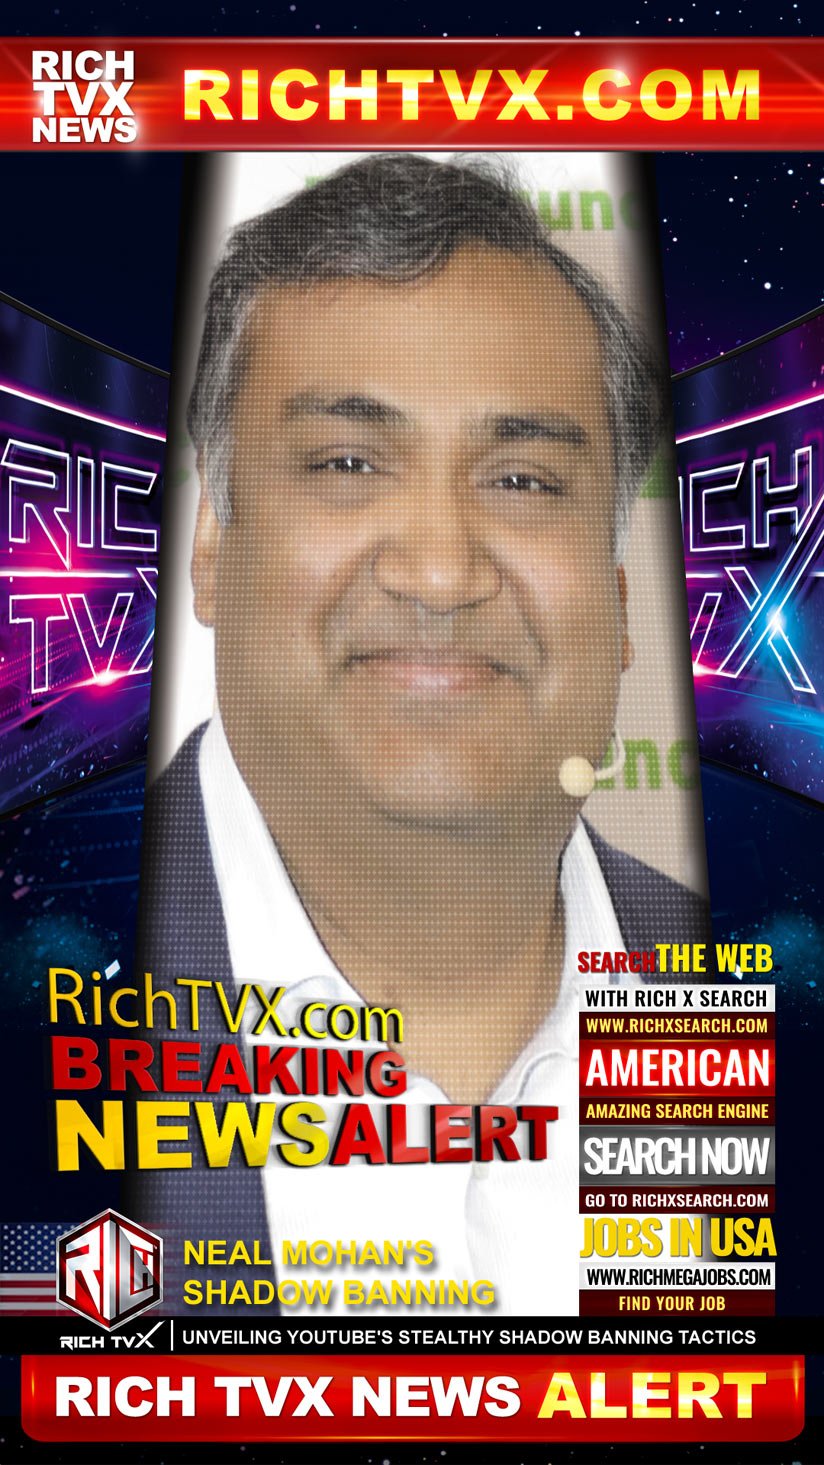 Rich TVX News Ceases Reporting on Putin Regime in Protest of YouTube’s CEO Neal Mohan’s Shadow Banning